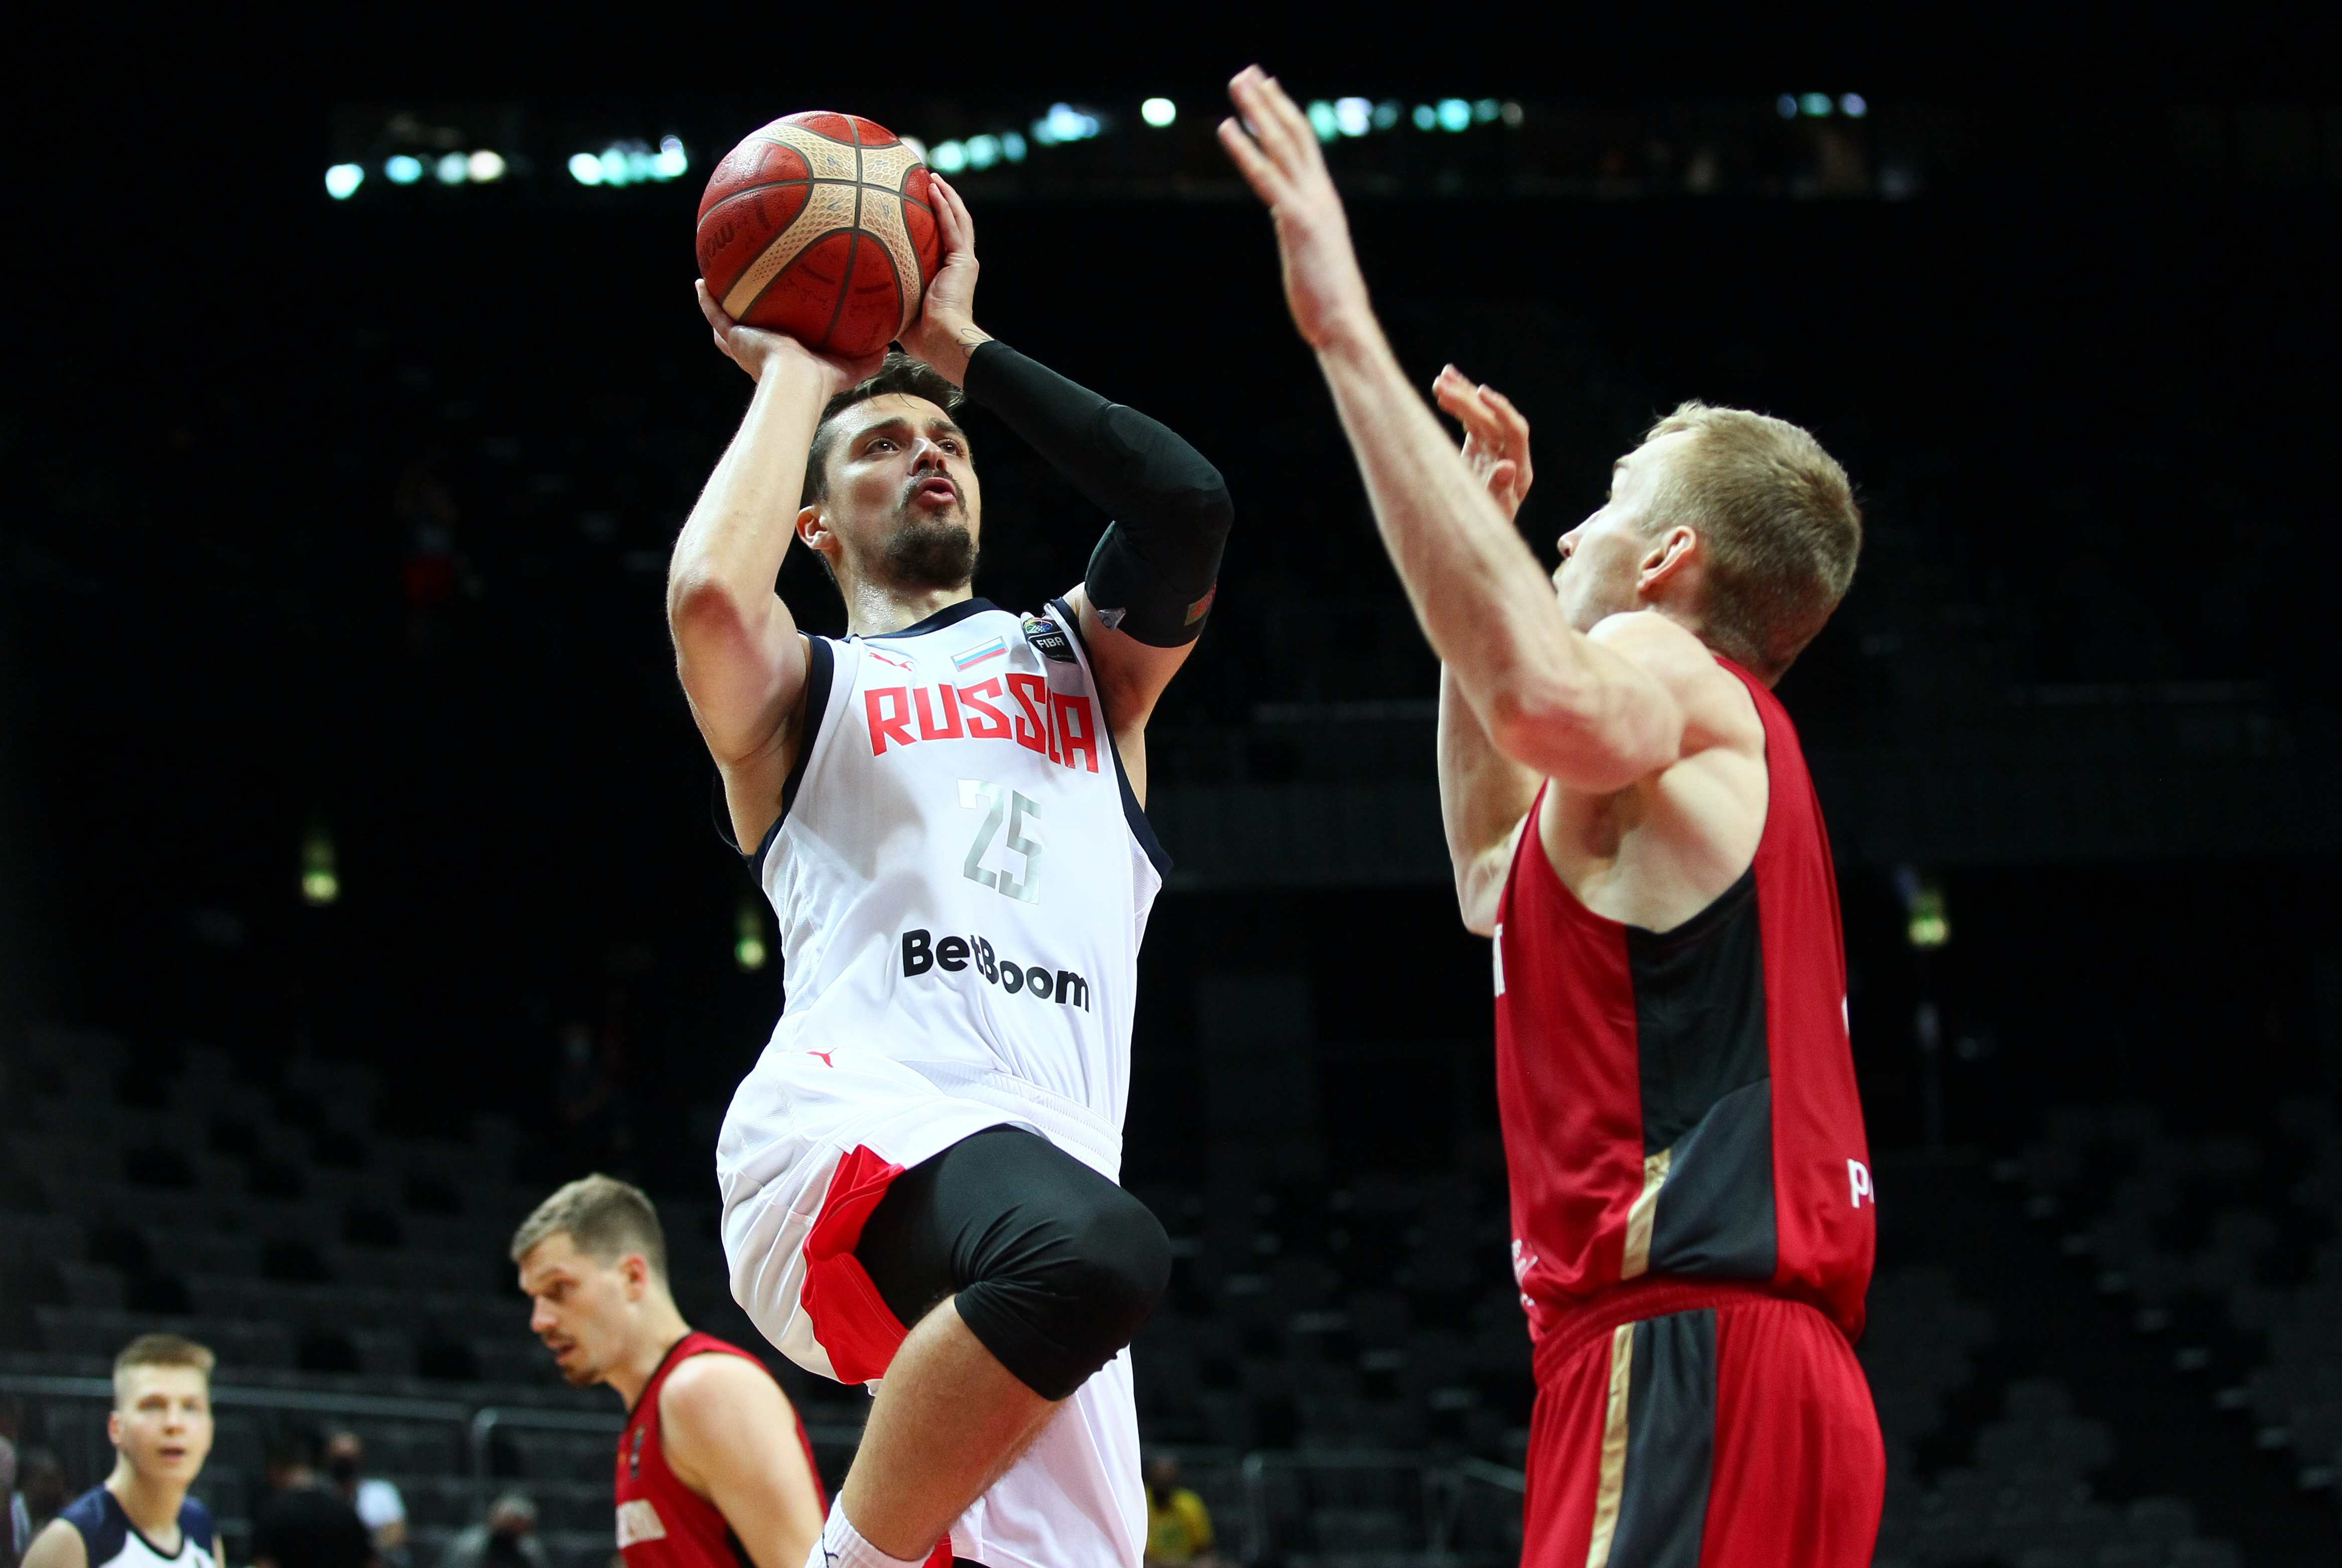 Basketball - FIBA Olympic Qualifying Tournament - Russia v Germany - Spaladium Arena, Split, Croatia - July 1, 2021 Russia's Anton Astapkovich in action with Germany's Niels Giffey REUTERS/Antonio Bronic